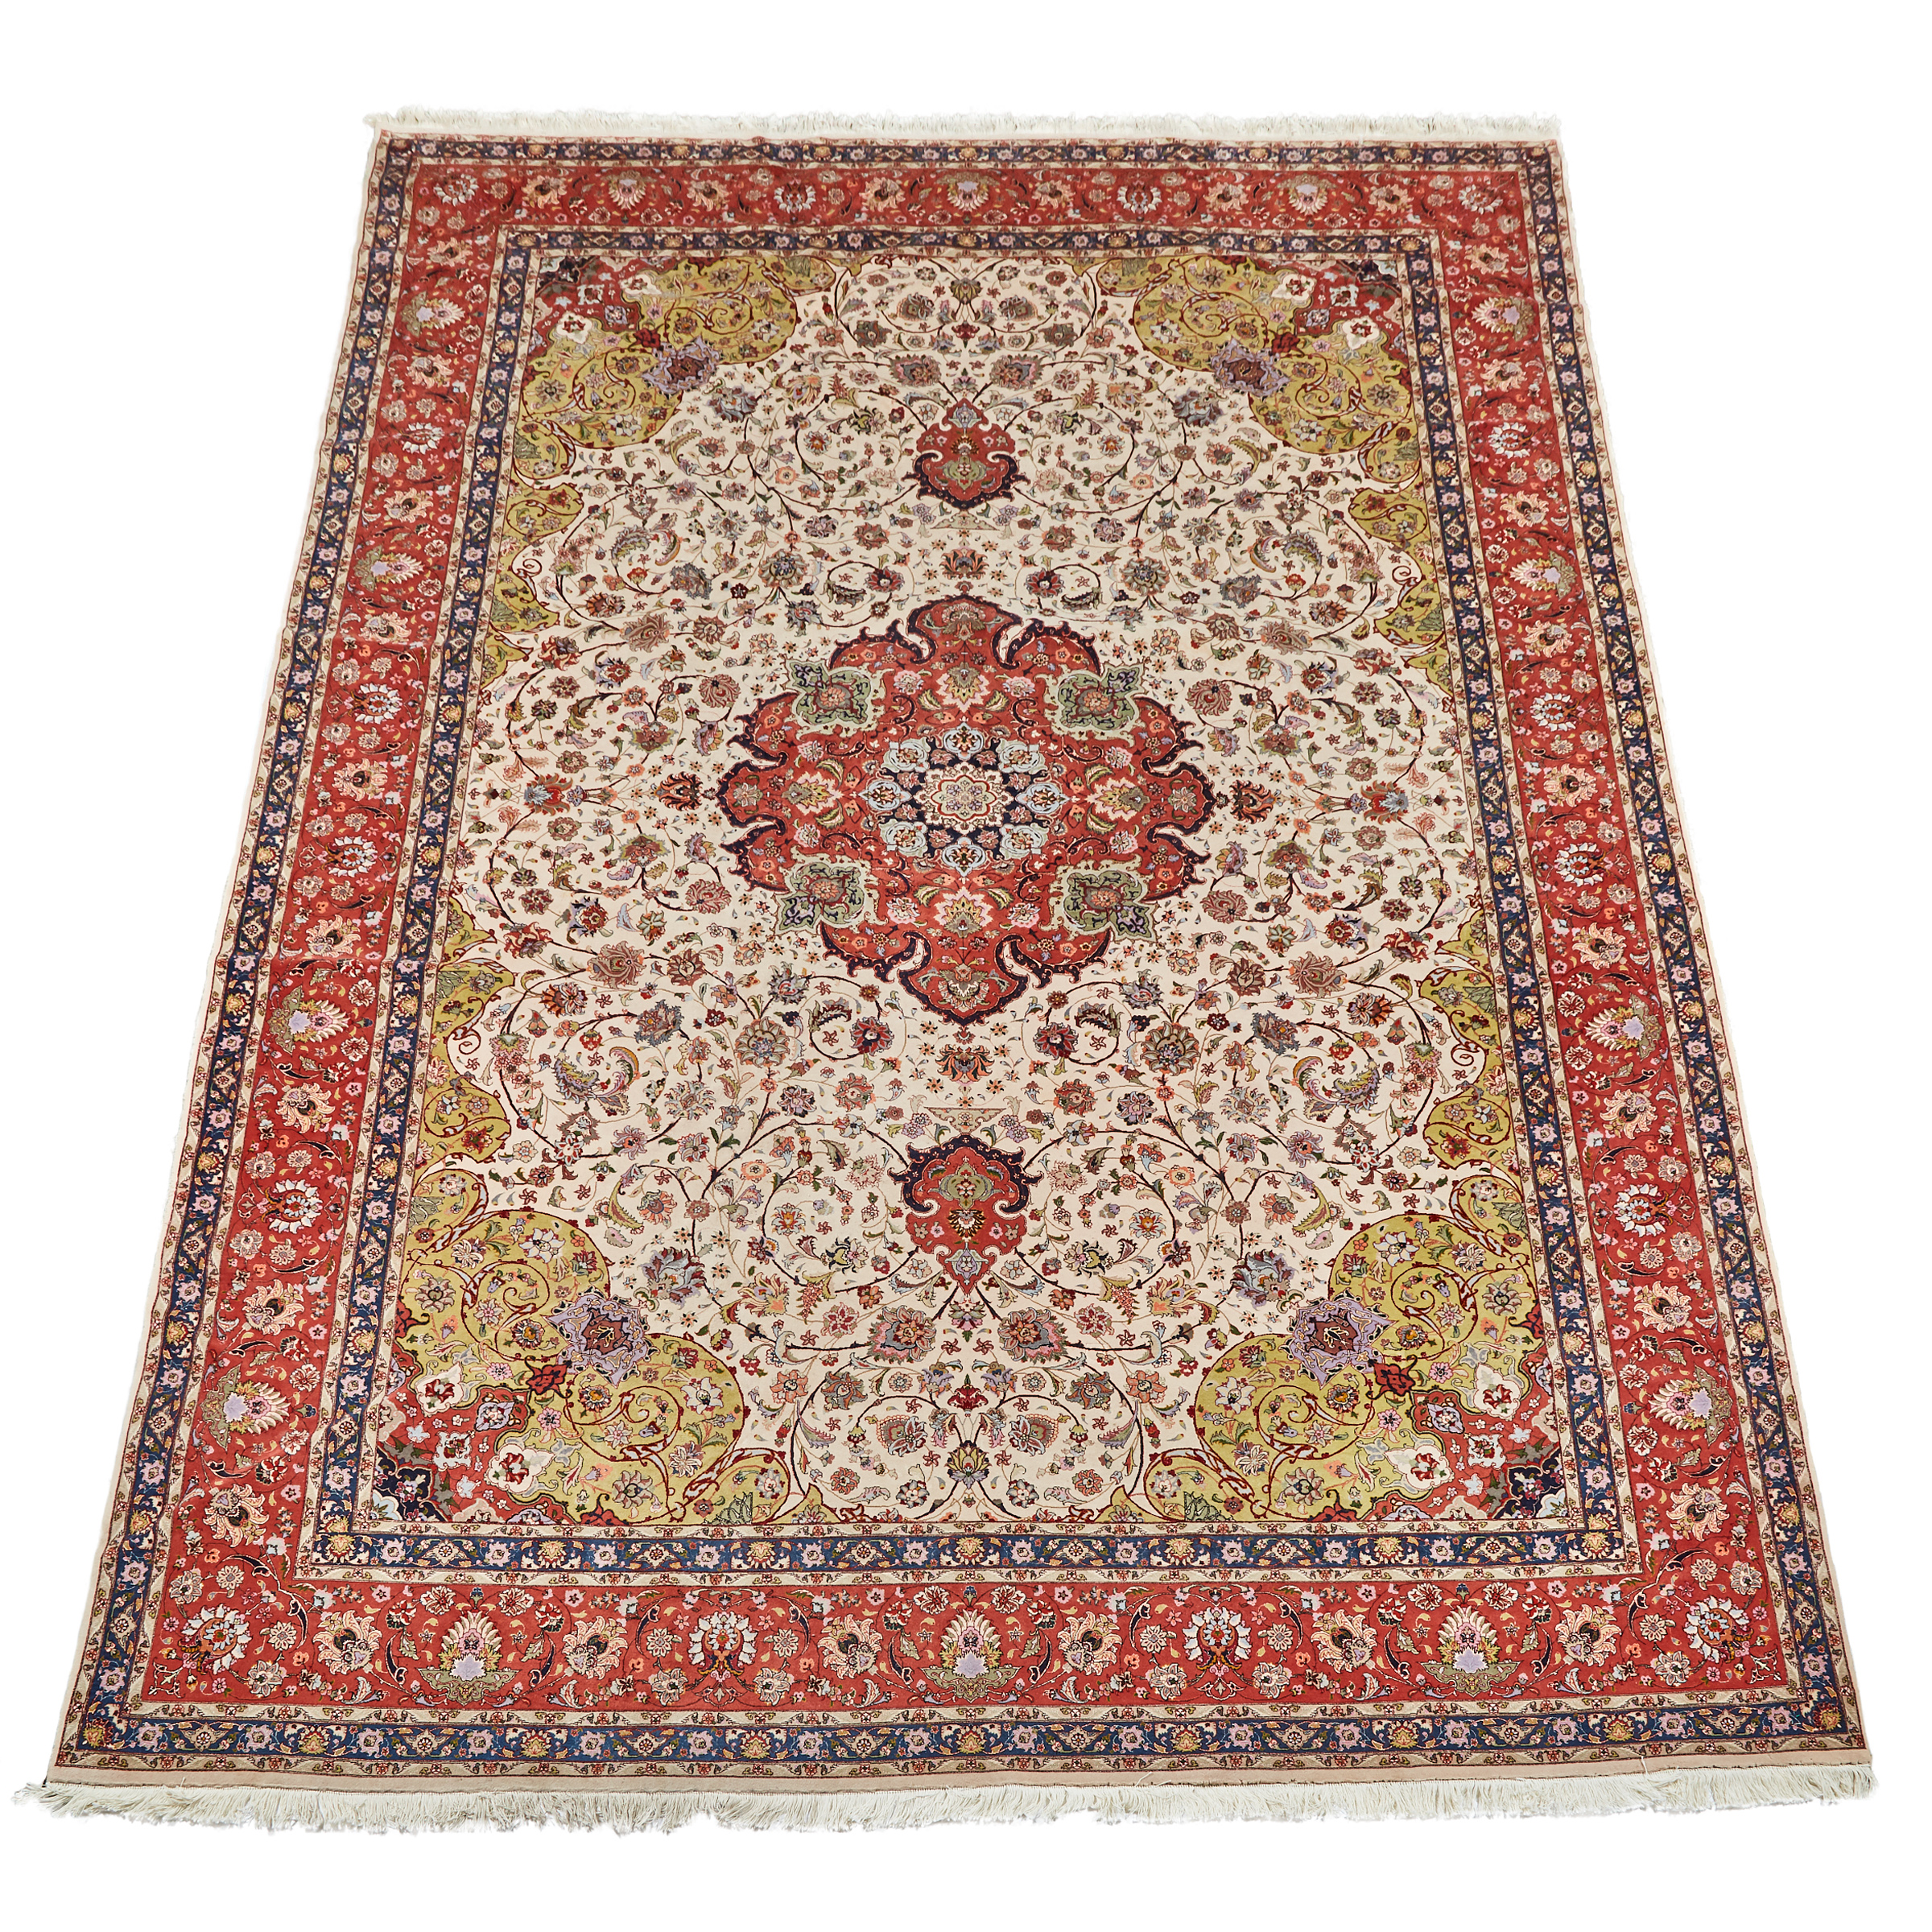 Ispahan Wool And Silk Carpet, Persian, mid to late 20th century